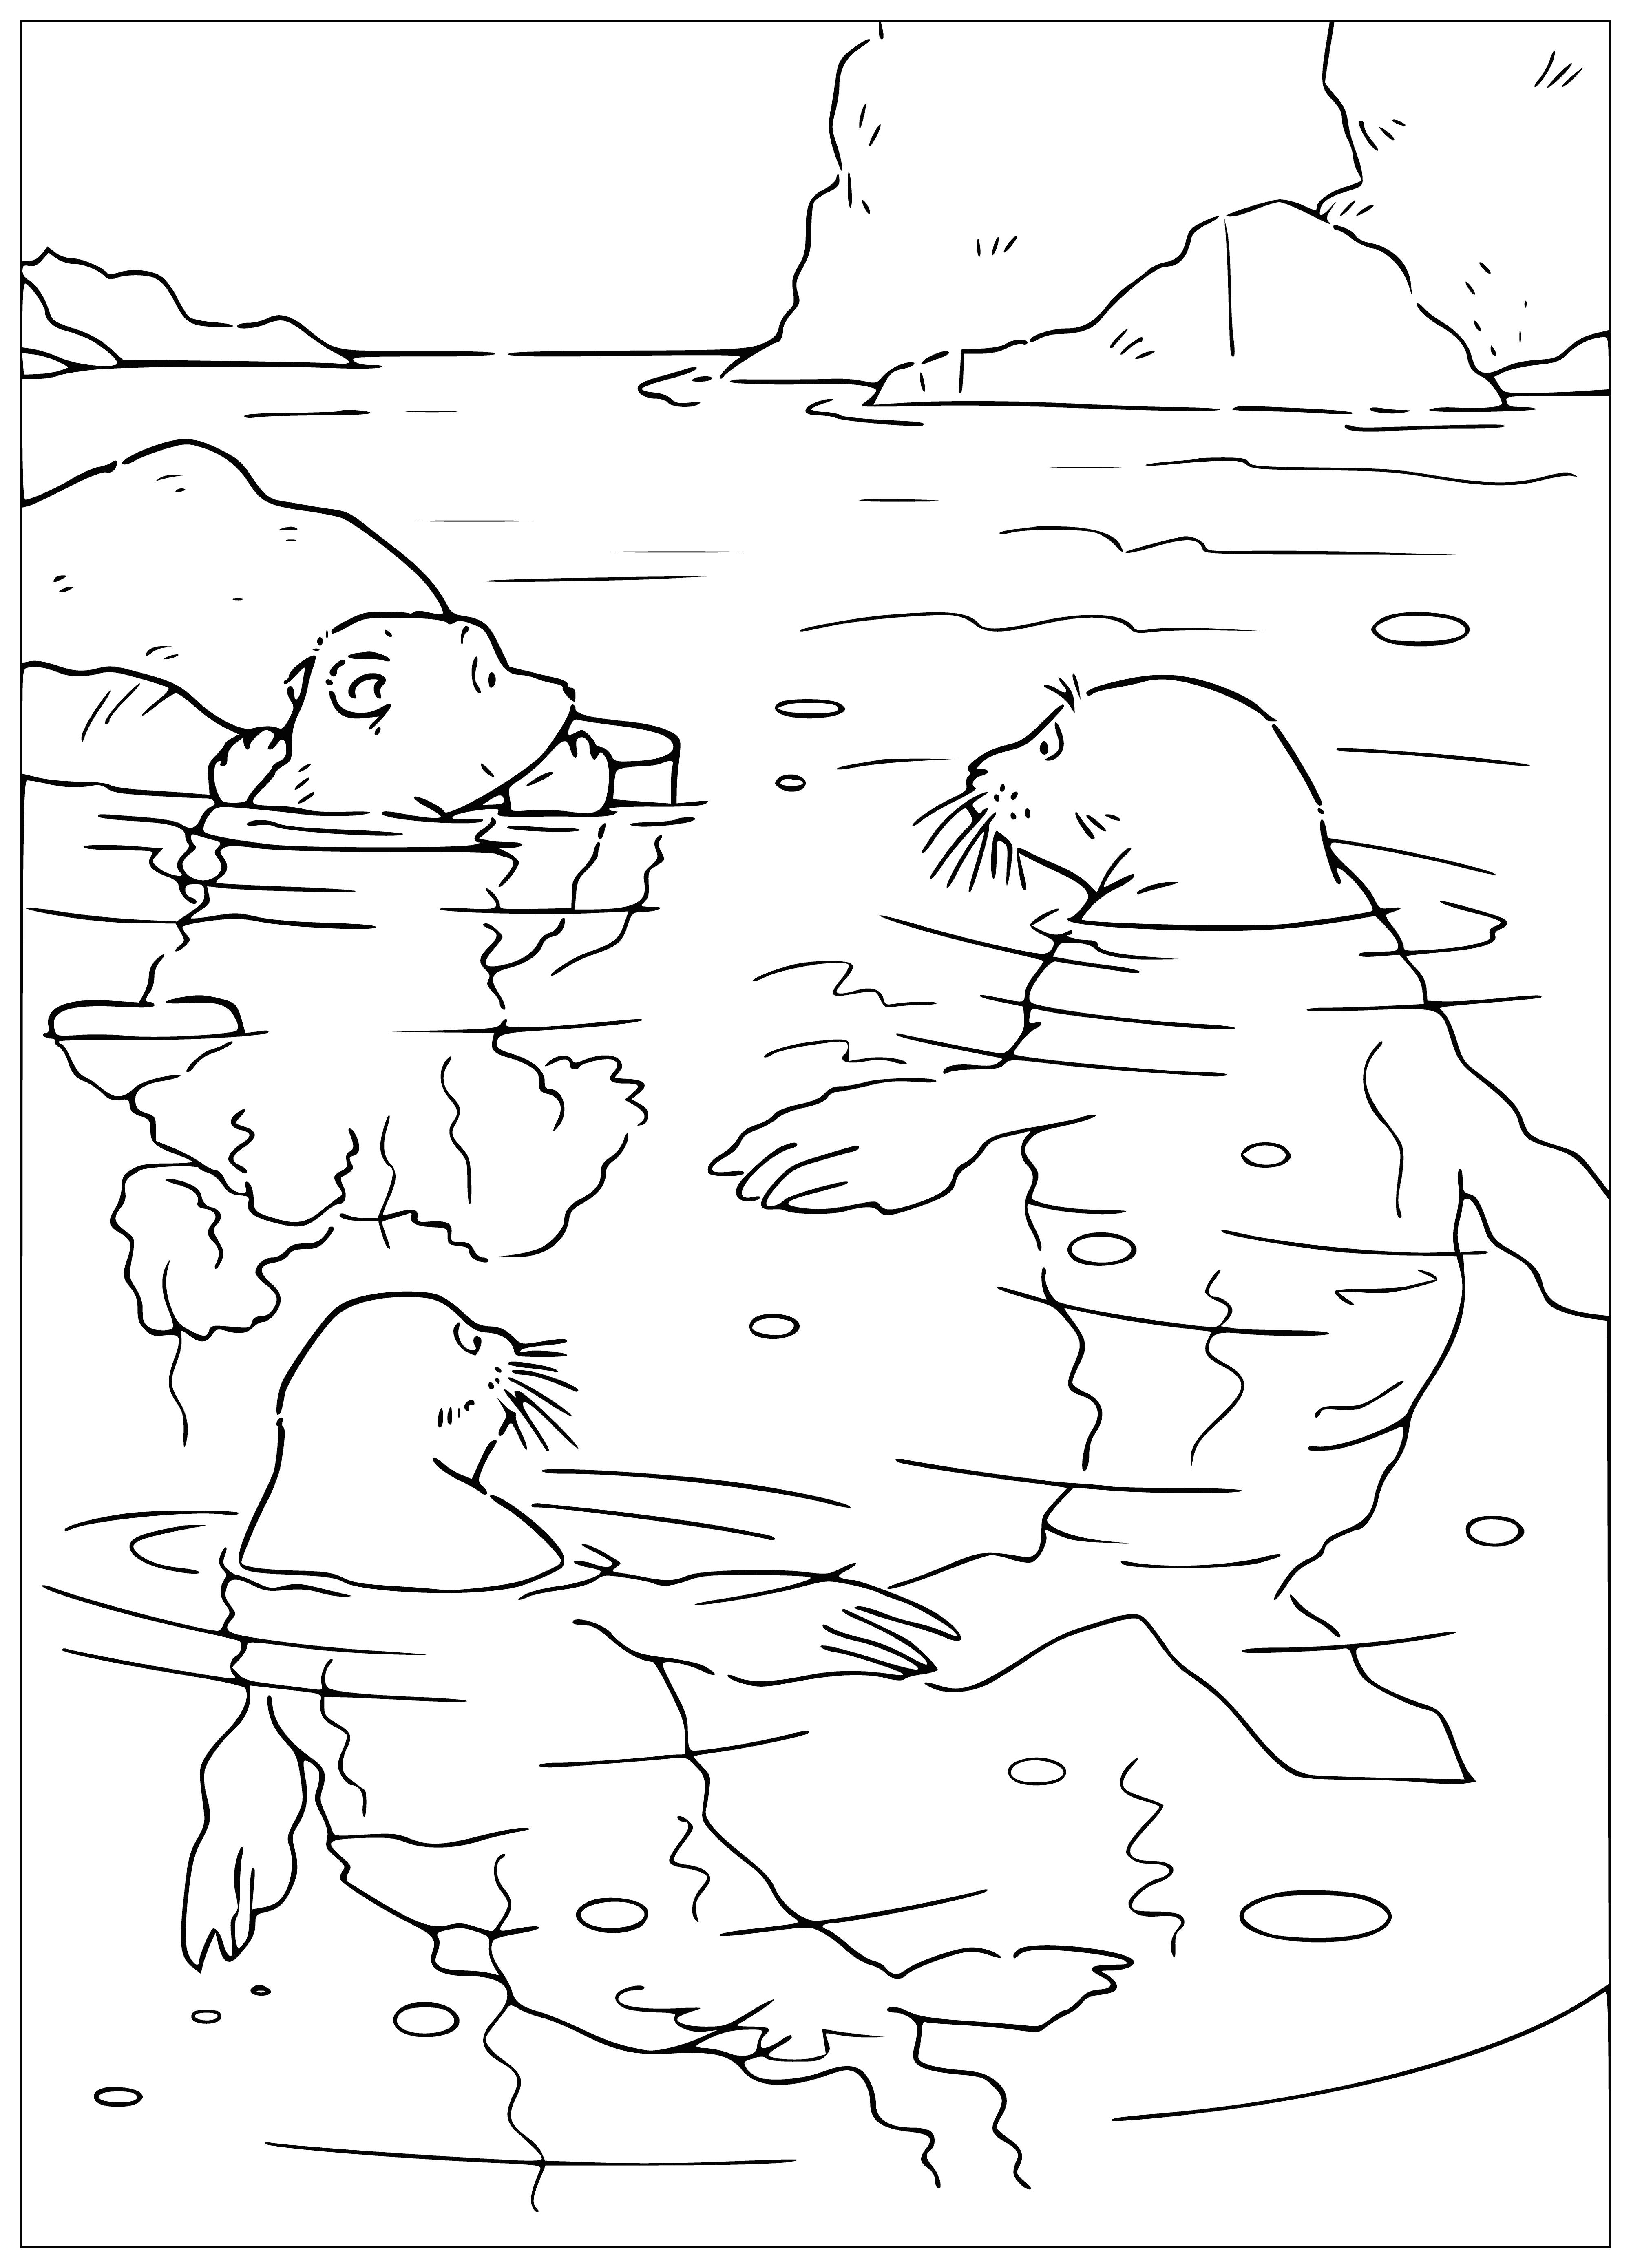 coloring page: A polar bear named Lars plays with seals, enjoying himself immensely.